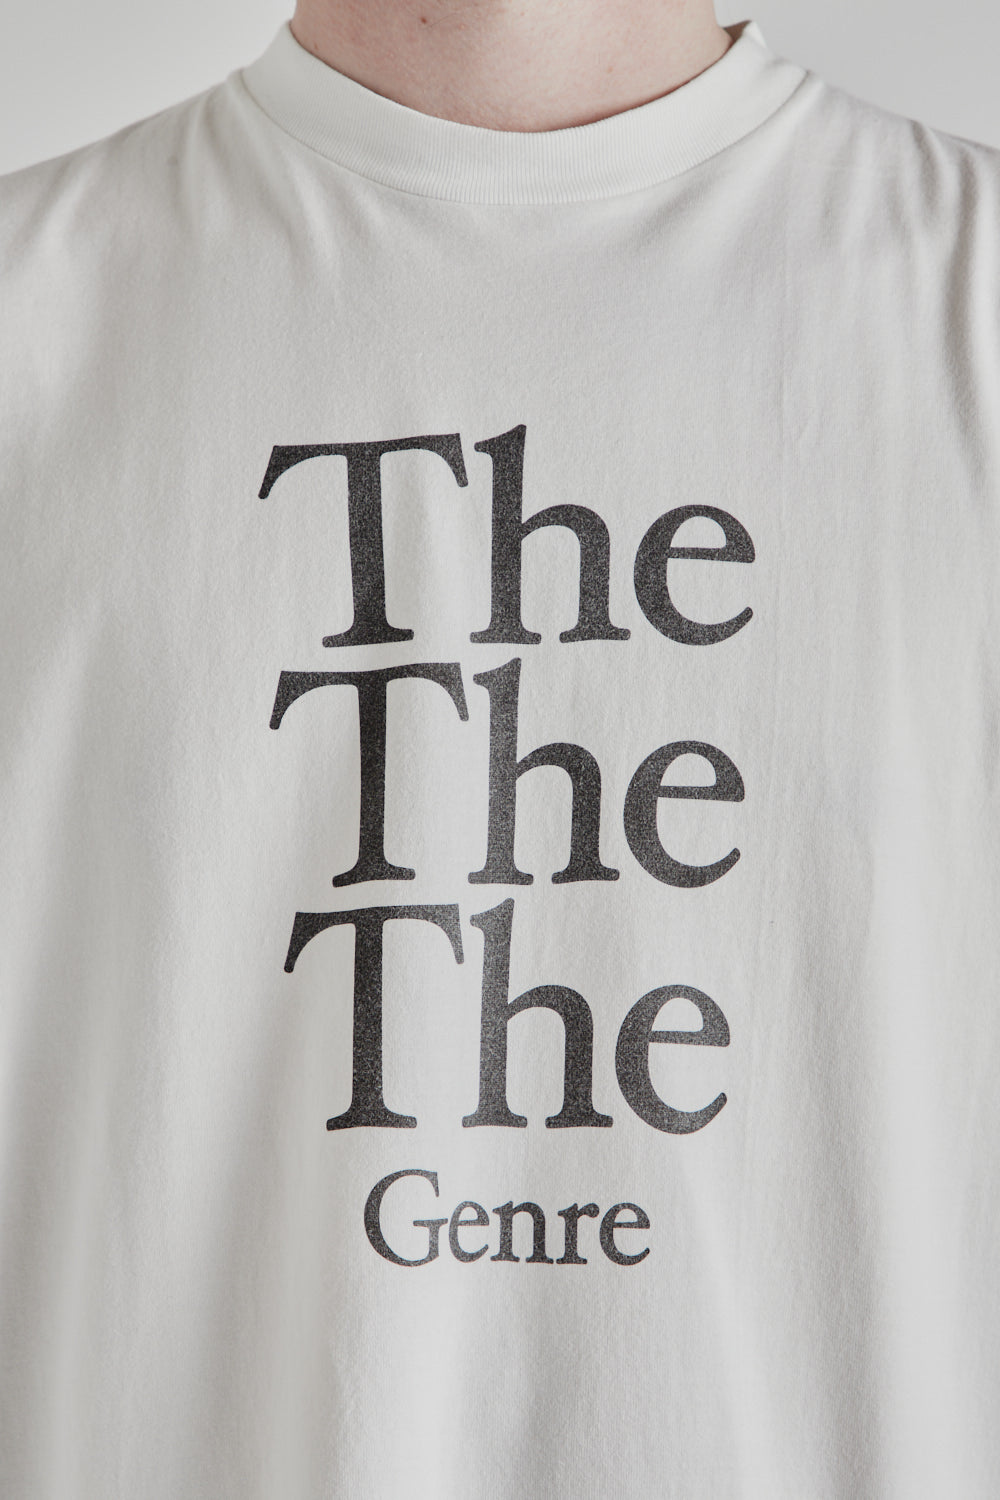 Blurhms Rootstock The Genre The Print Wide Tee in White